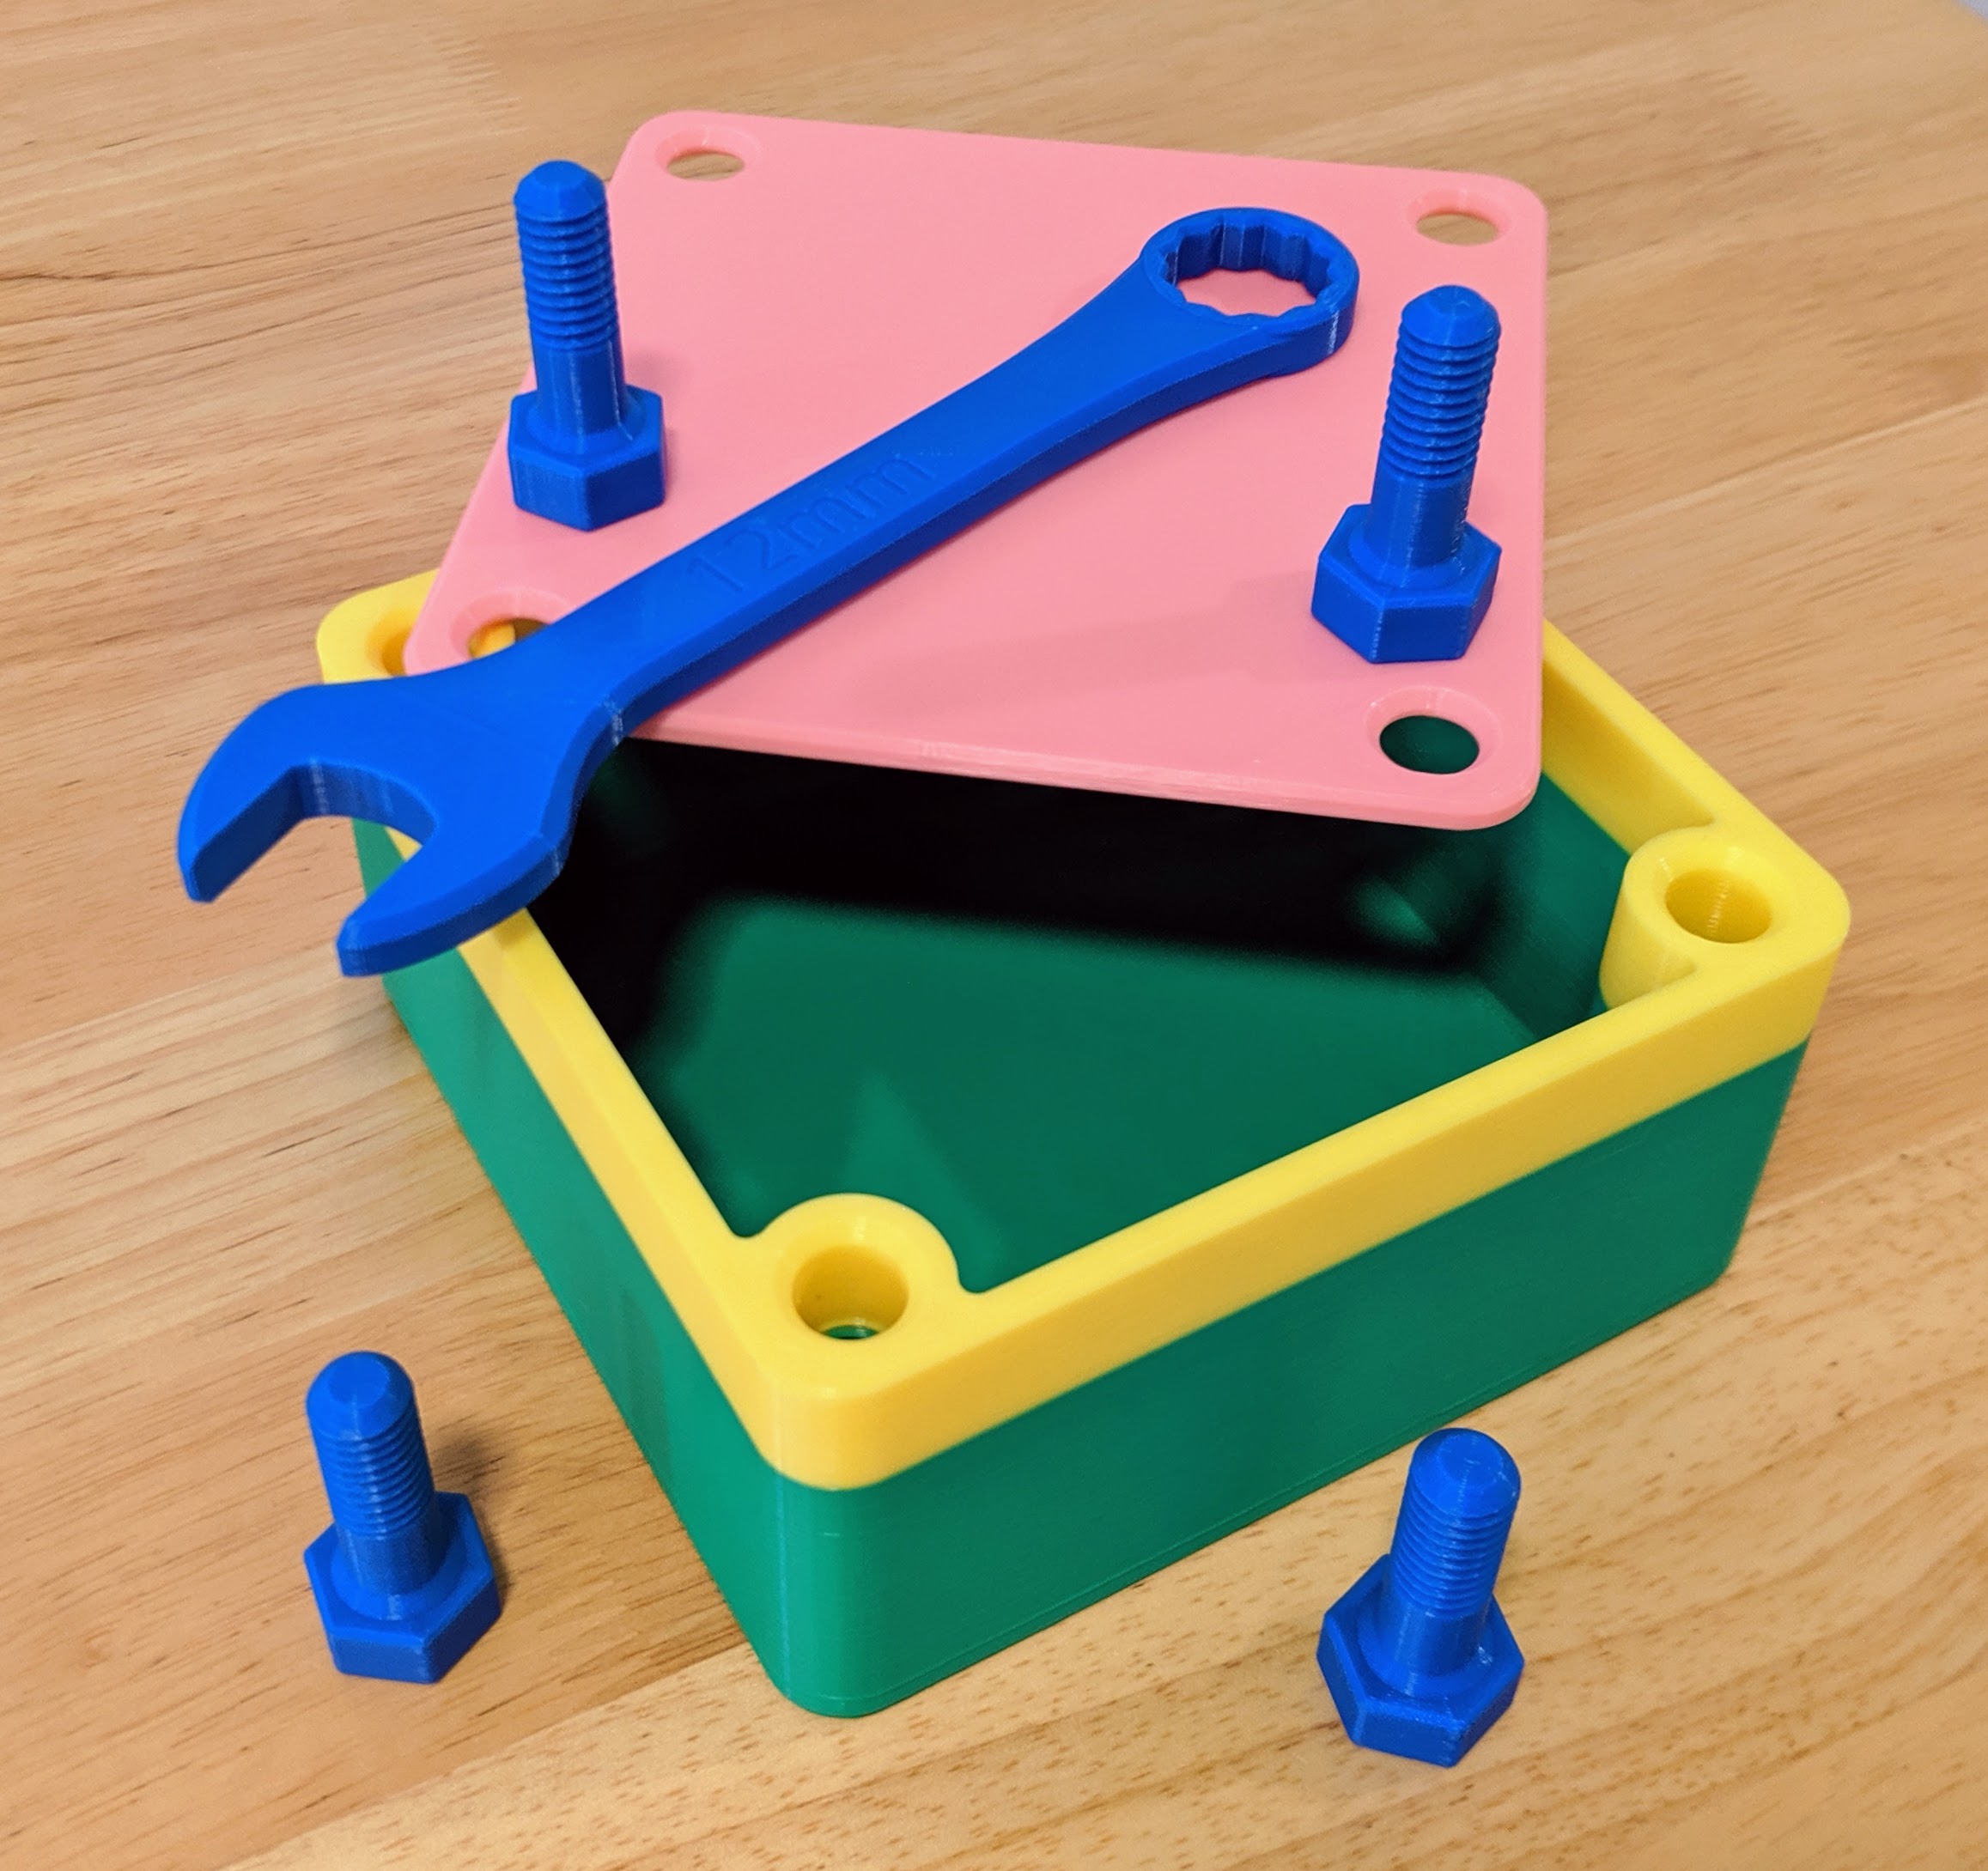 Kids Toy: Wrench (Spanner) and Bolt Box